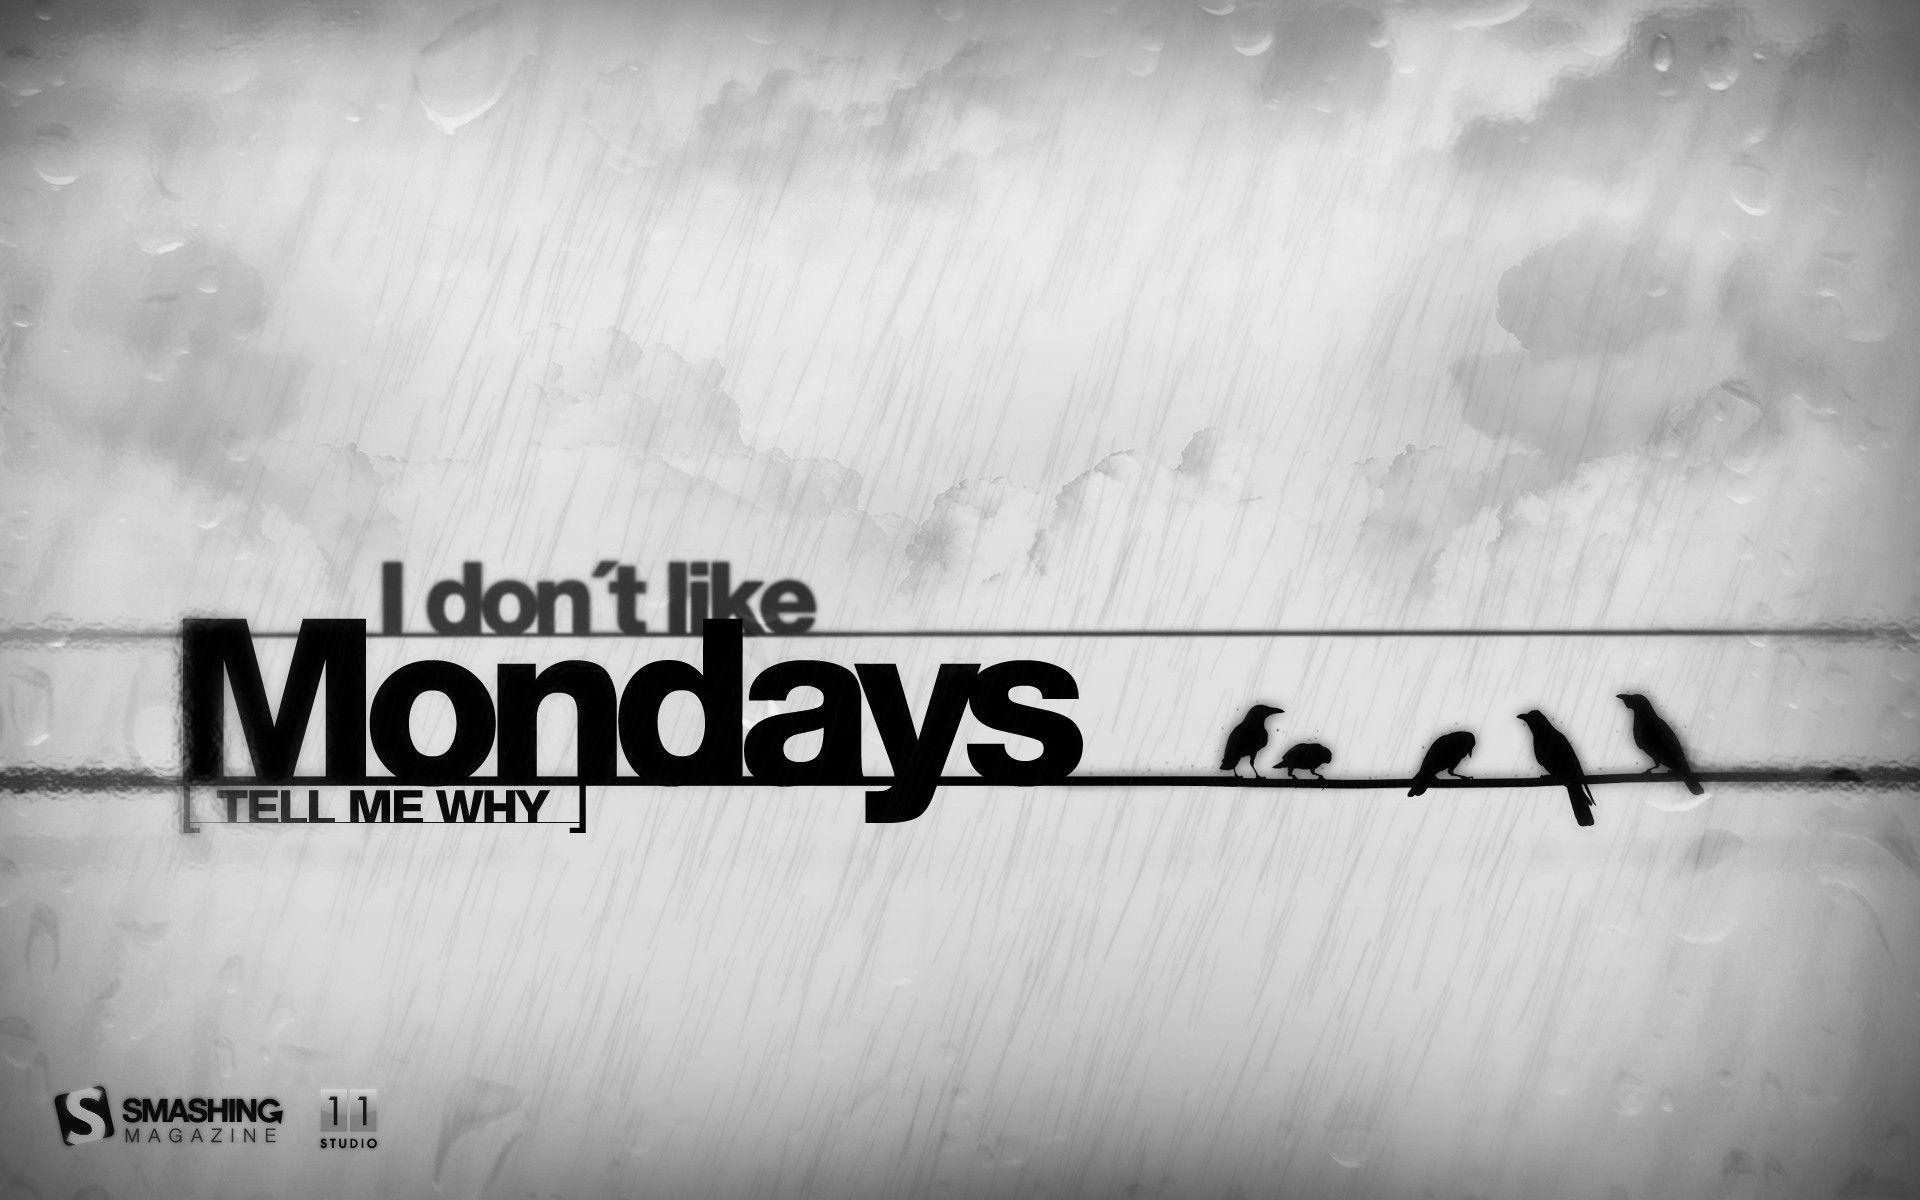 Monday Quotes 4 Cool HD Wallpaper. diverse